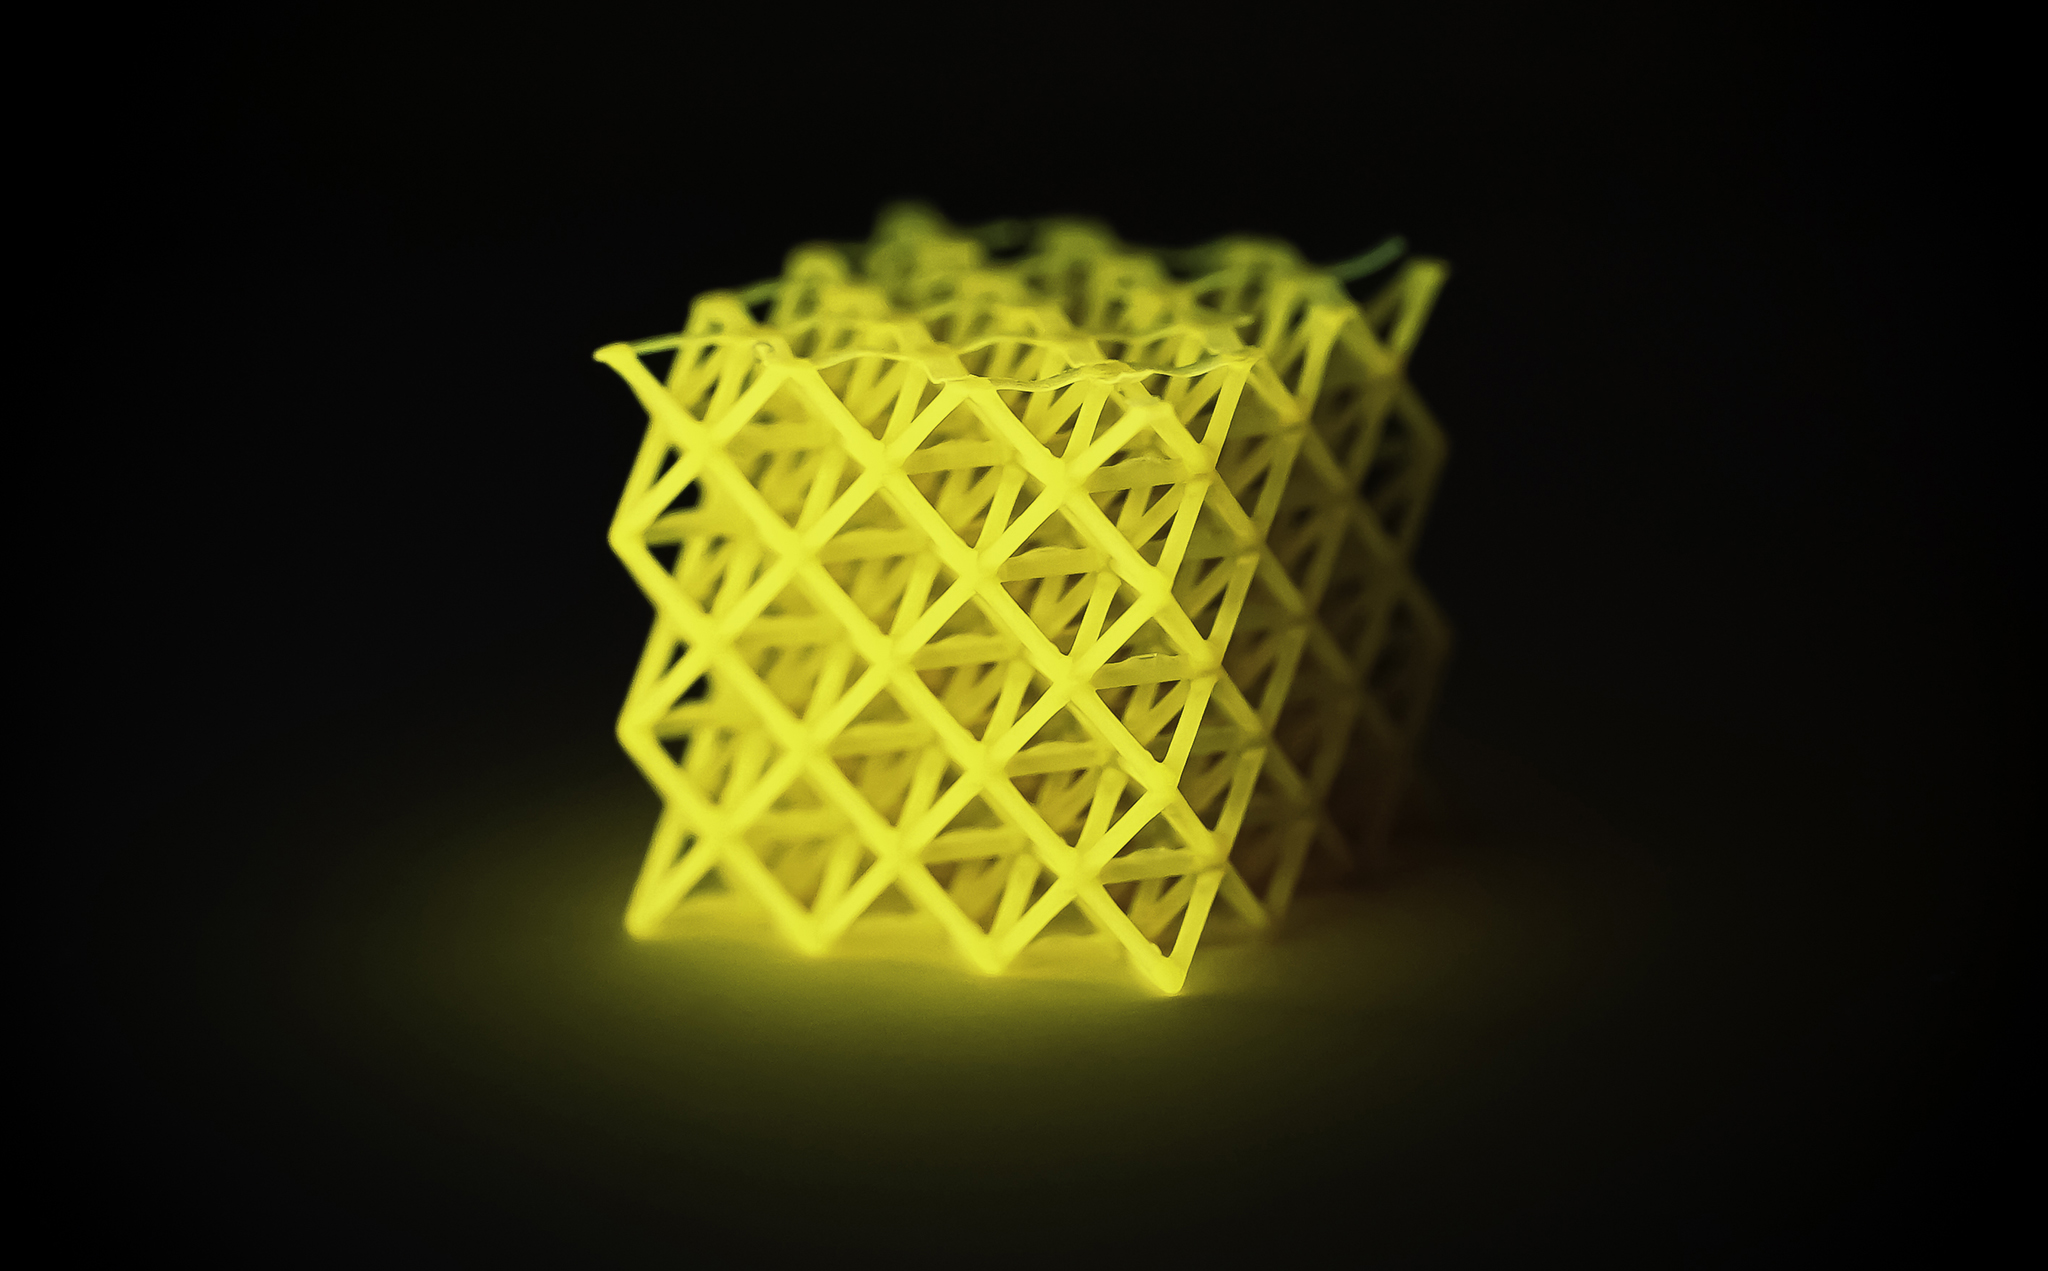 Second place image of a three-dimensional lattice composed of polyacrylate.